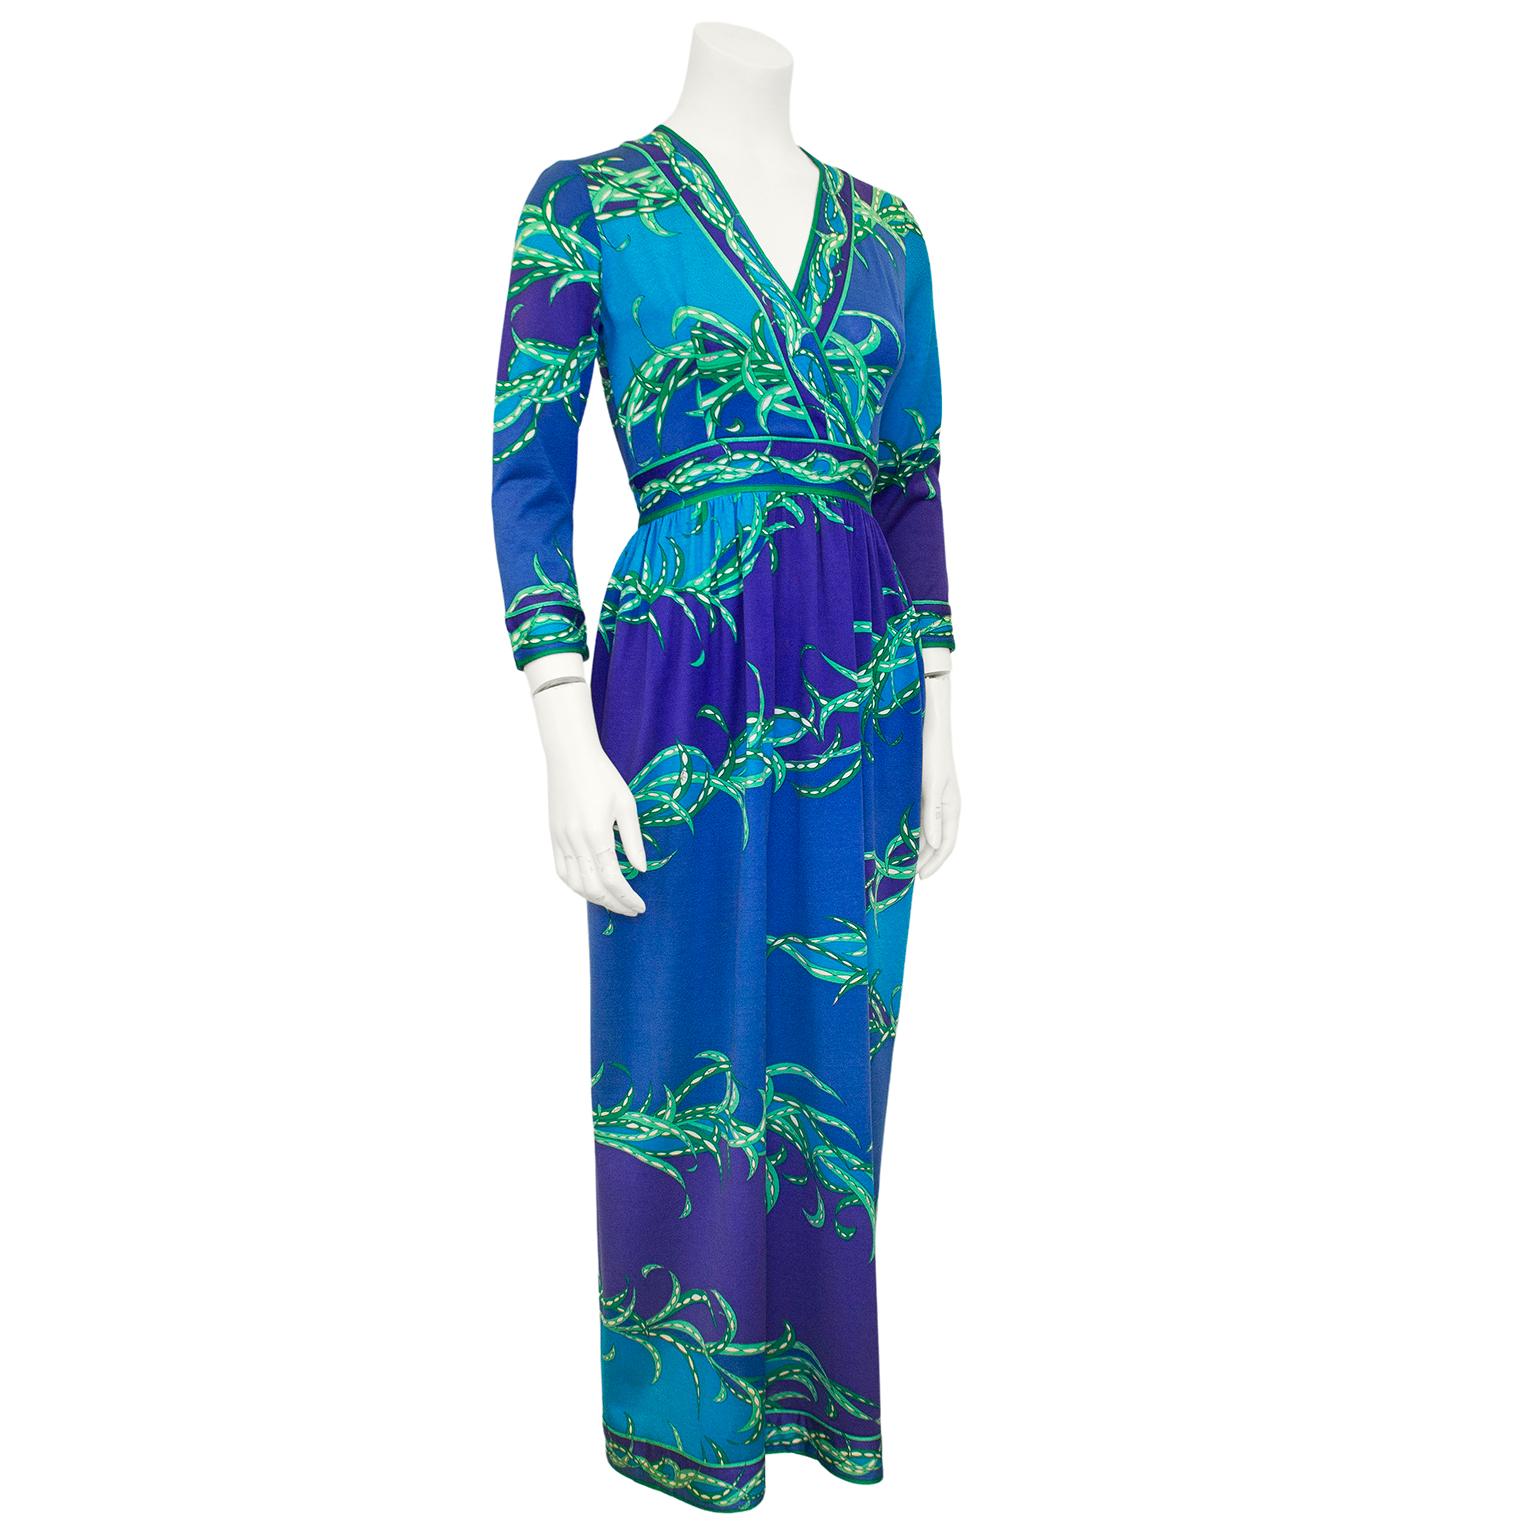 A classic and beautiful Emilio Pucci maxi dress dating from the 1970s. Blue and purple abstract colour blocking with a green and white leaf style print throughout. A very flattering shape with a deep v neckline, bracelet length sleeves, a waistband